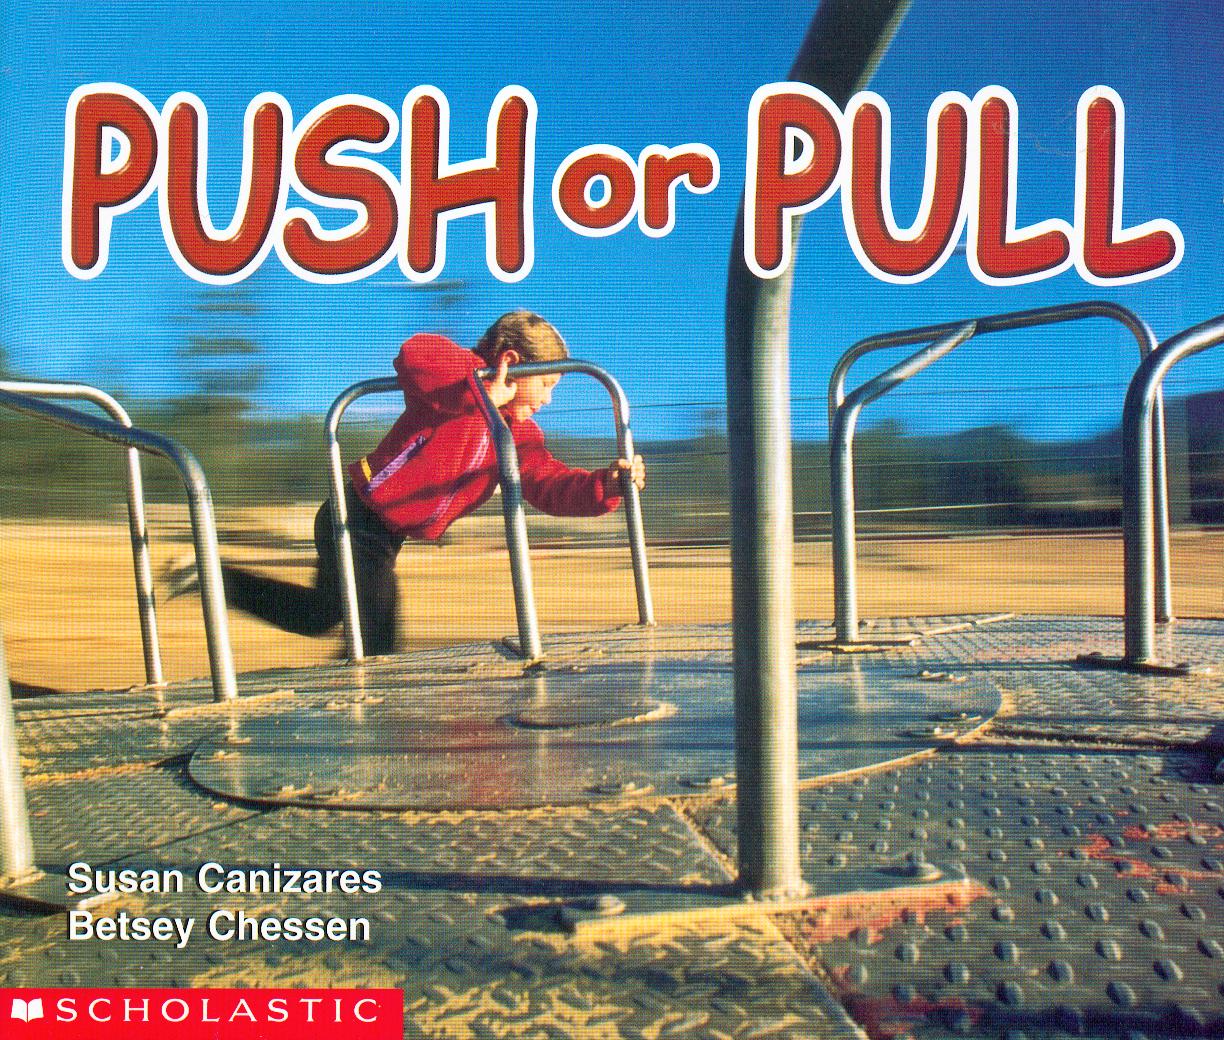 Push or pull / Susan Canizares and Betsey Chessen.